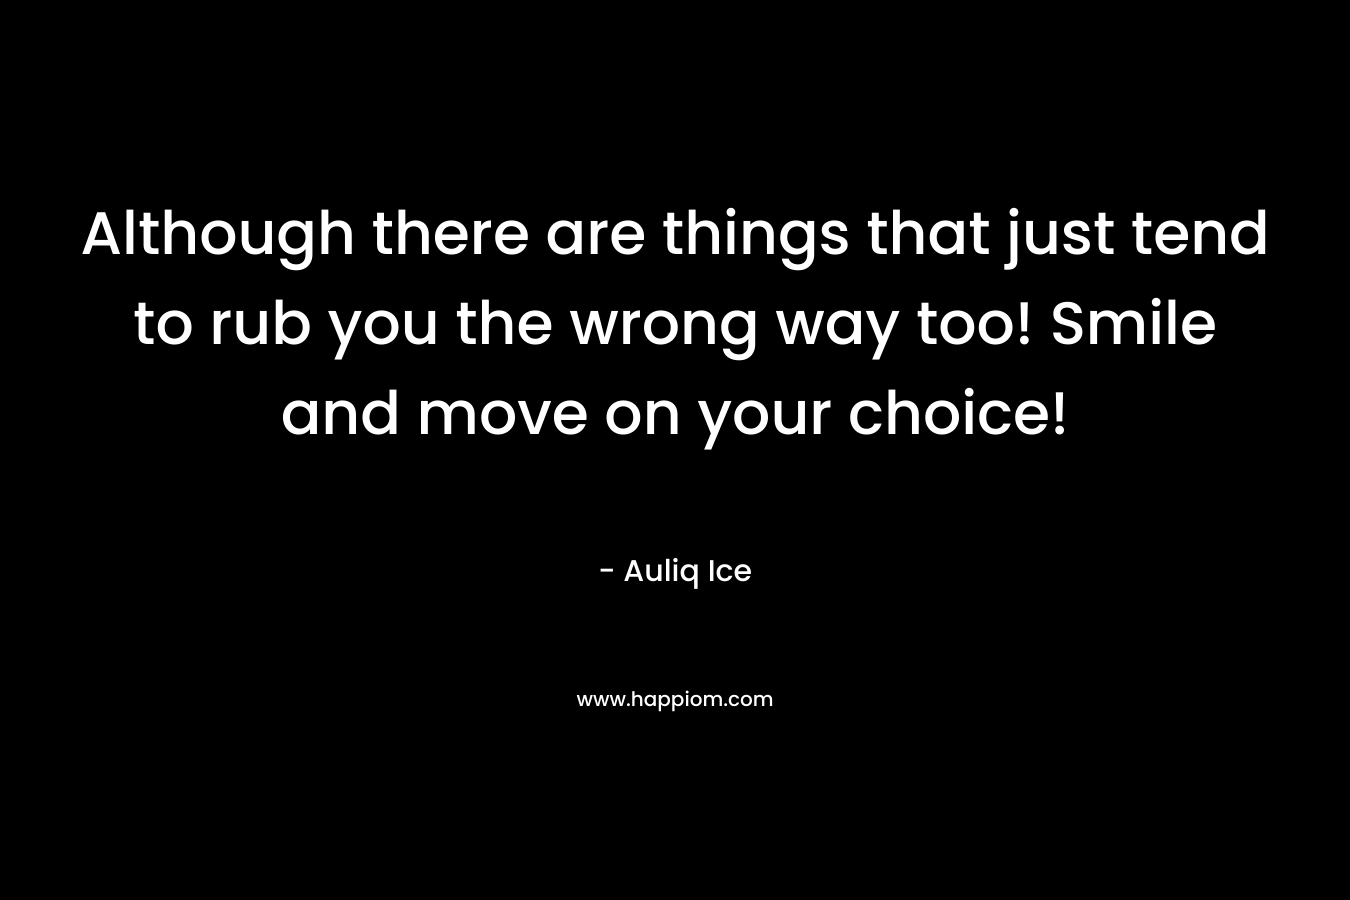 Although there are things that just tend to rub you the wrong way too! Smile and move on your choice! – Auliq Ice